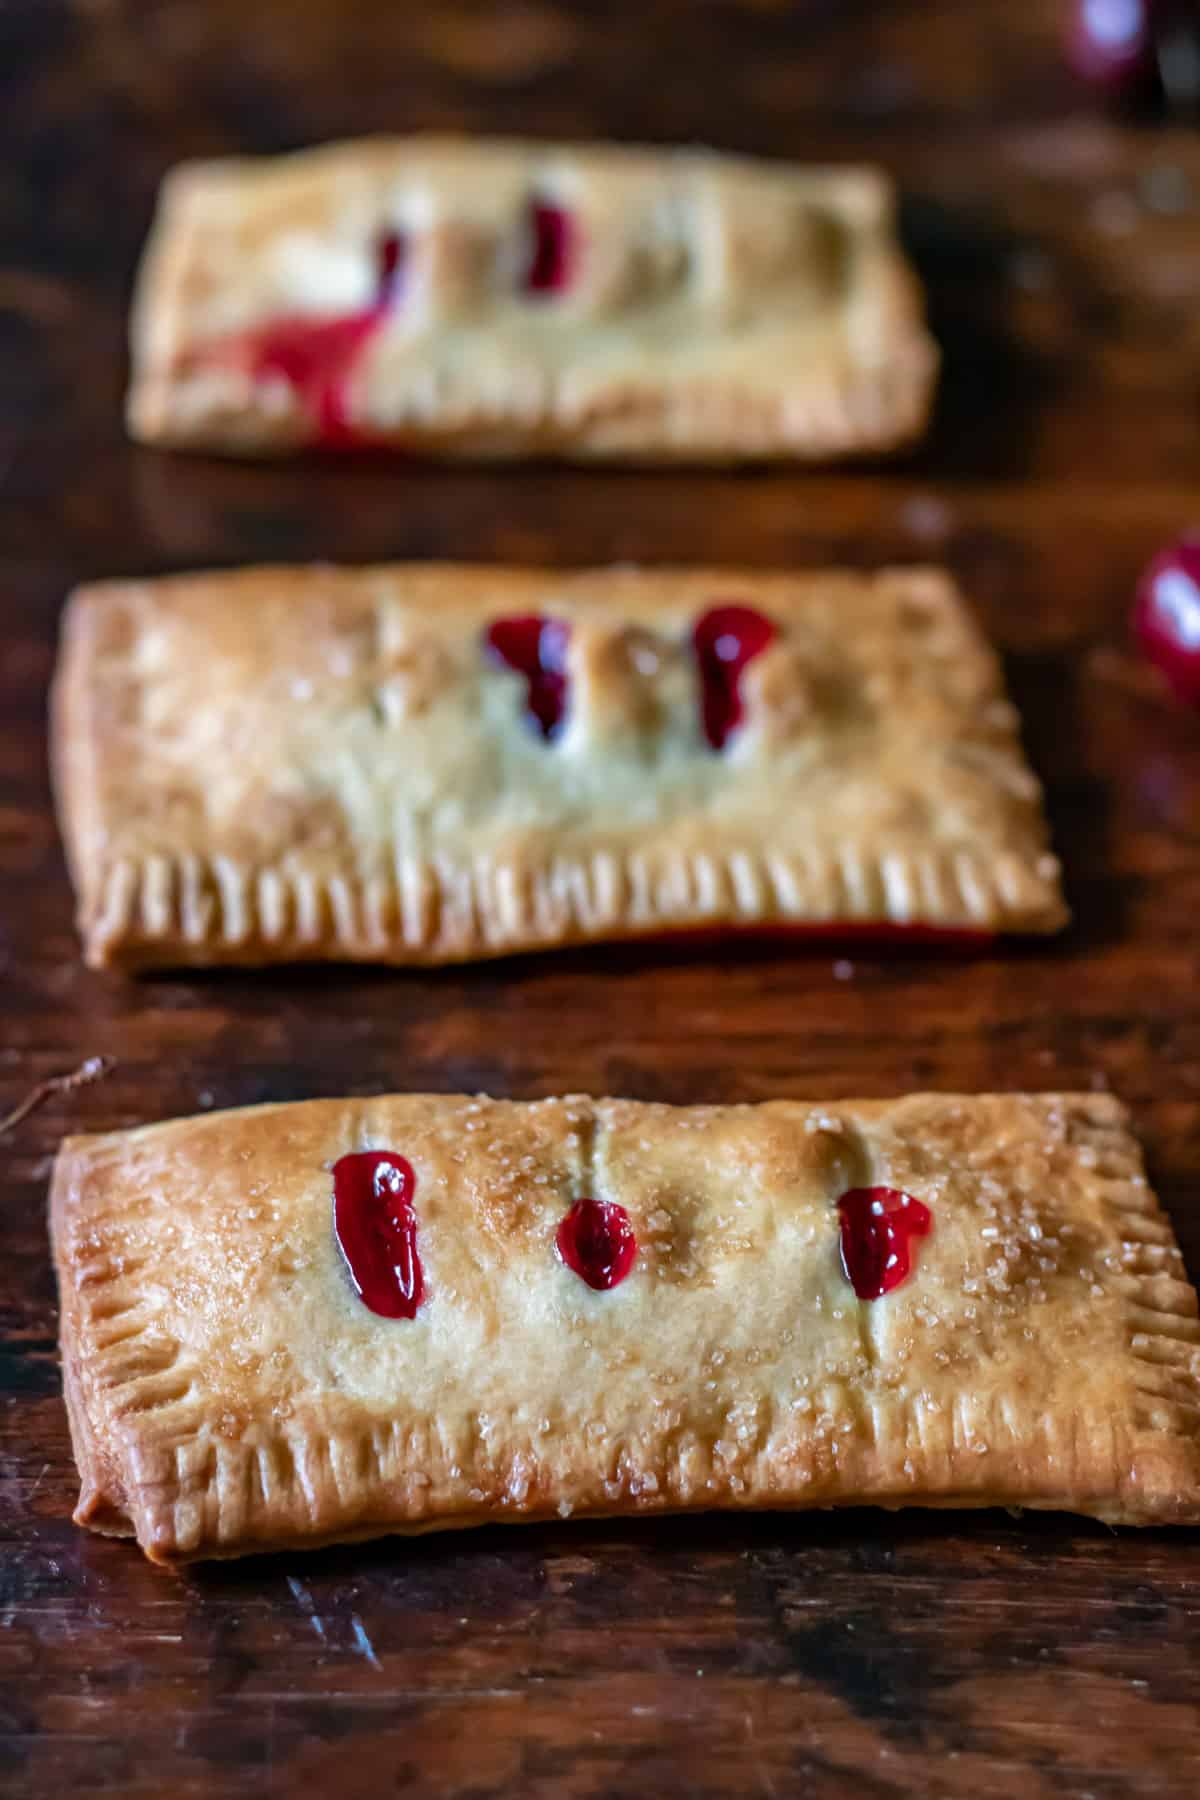 Table with a row of cherry hand pies.